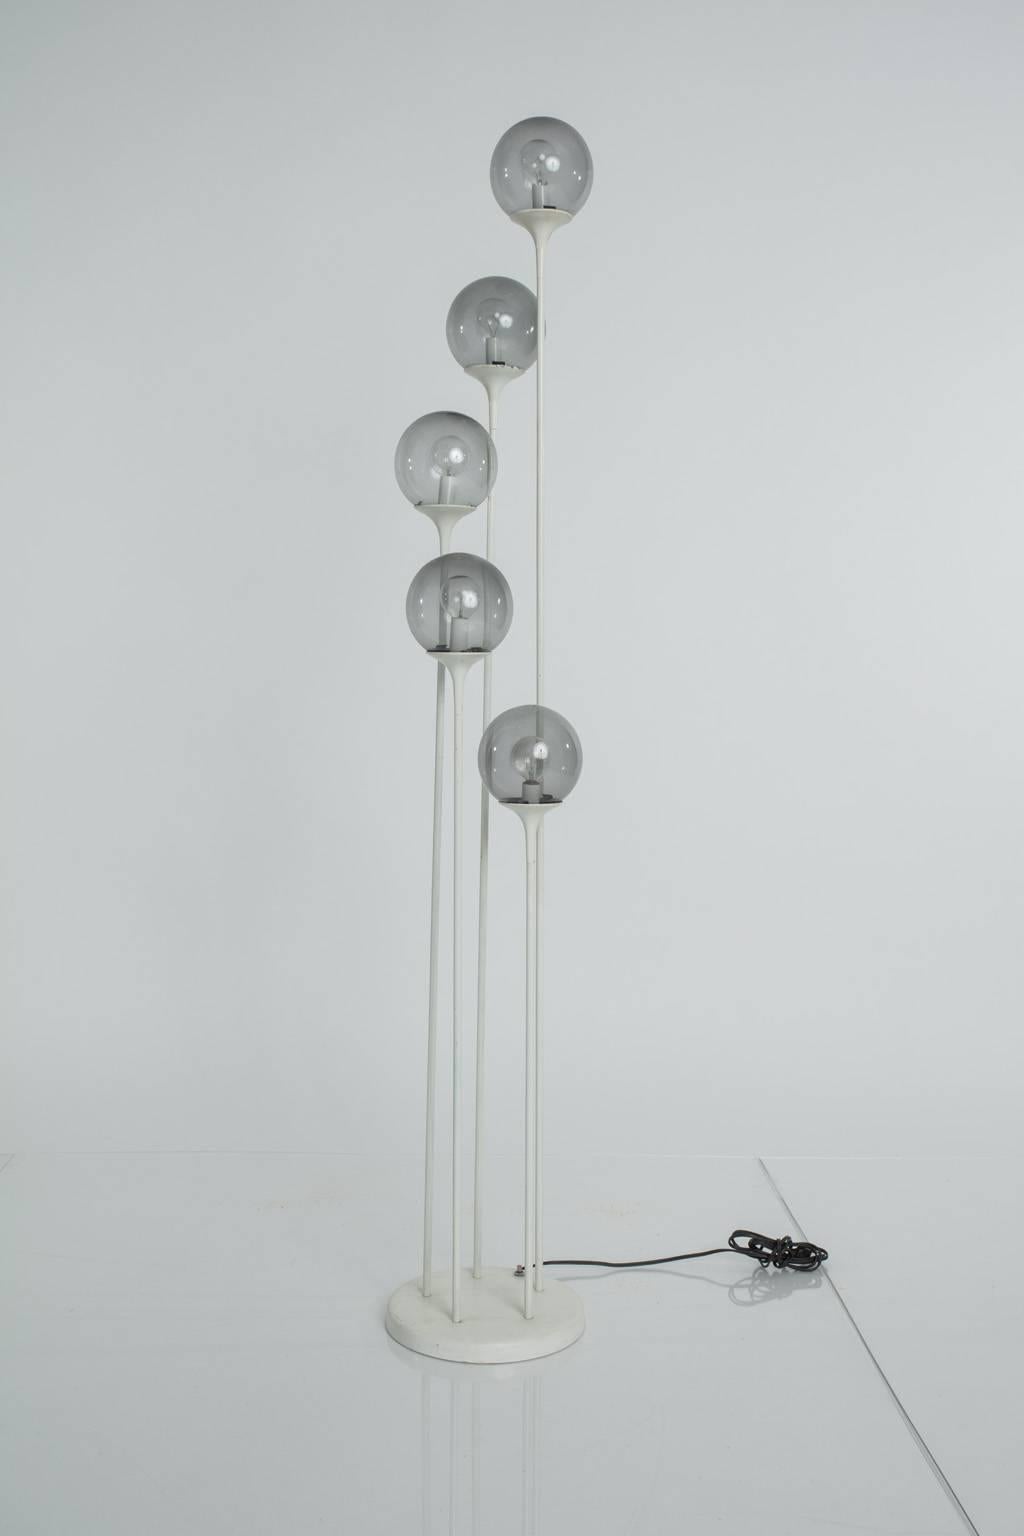 Five-light floor lamp with smoked glass globes.